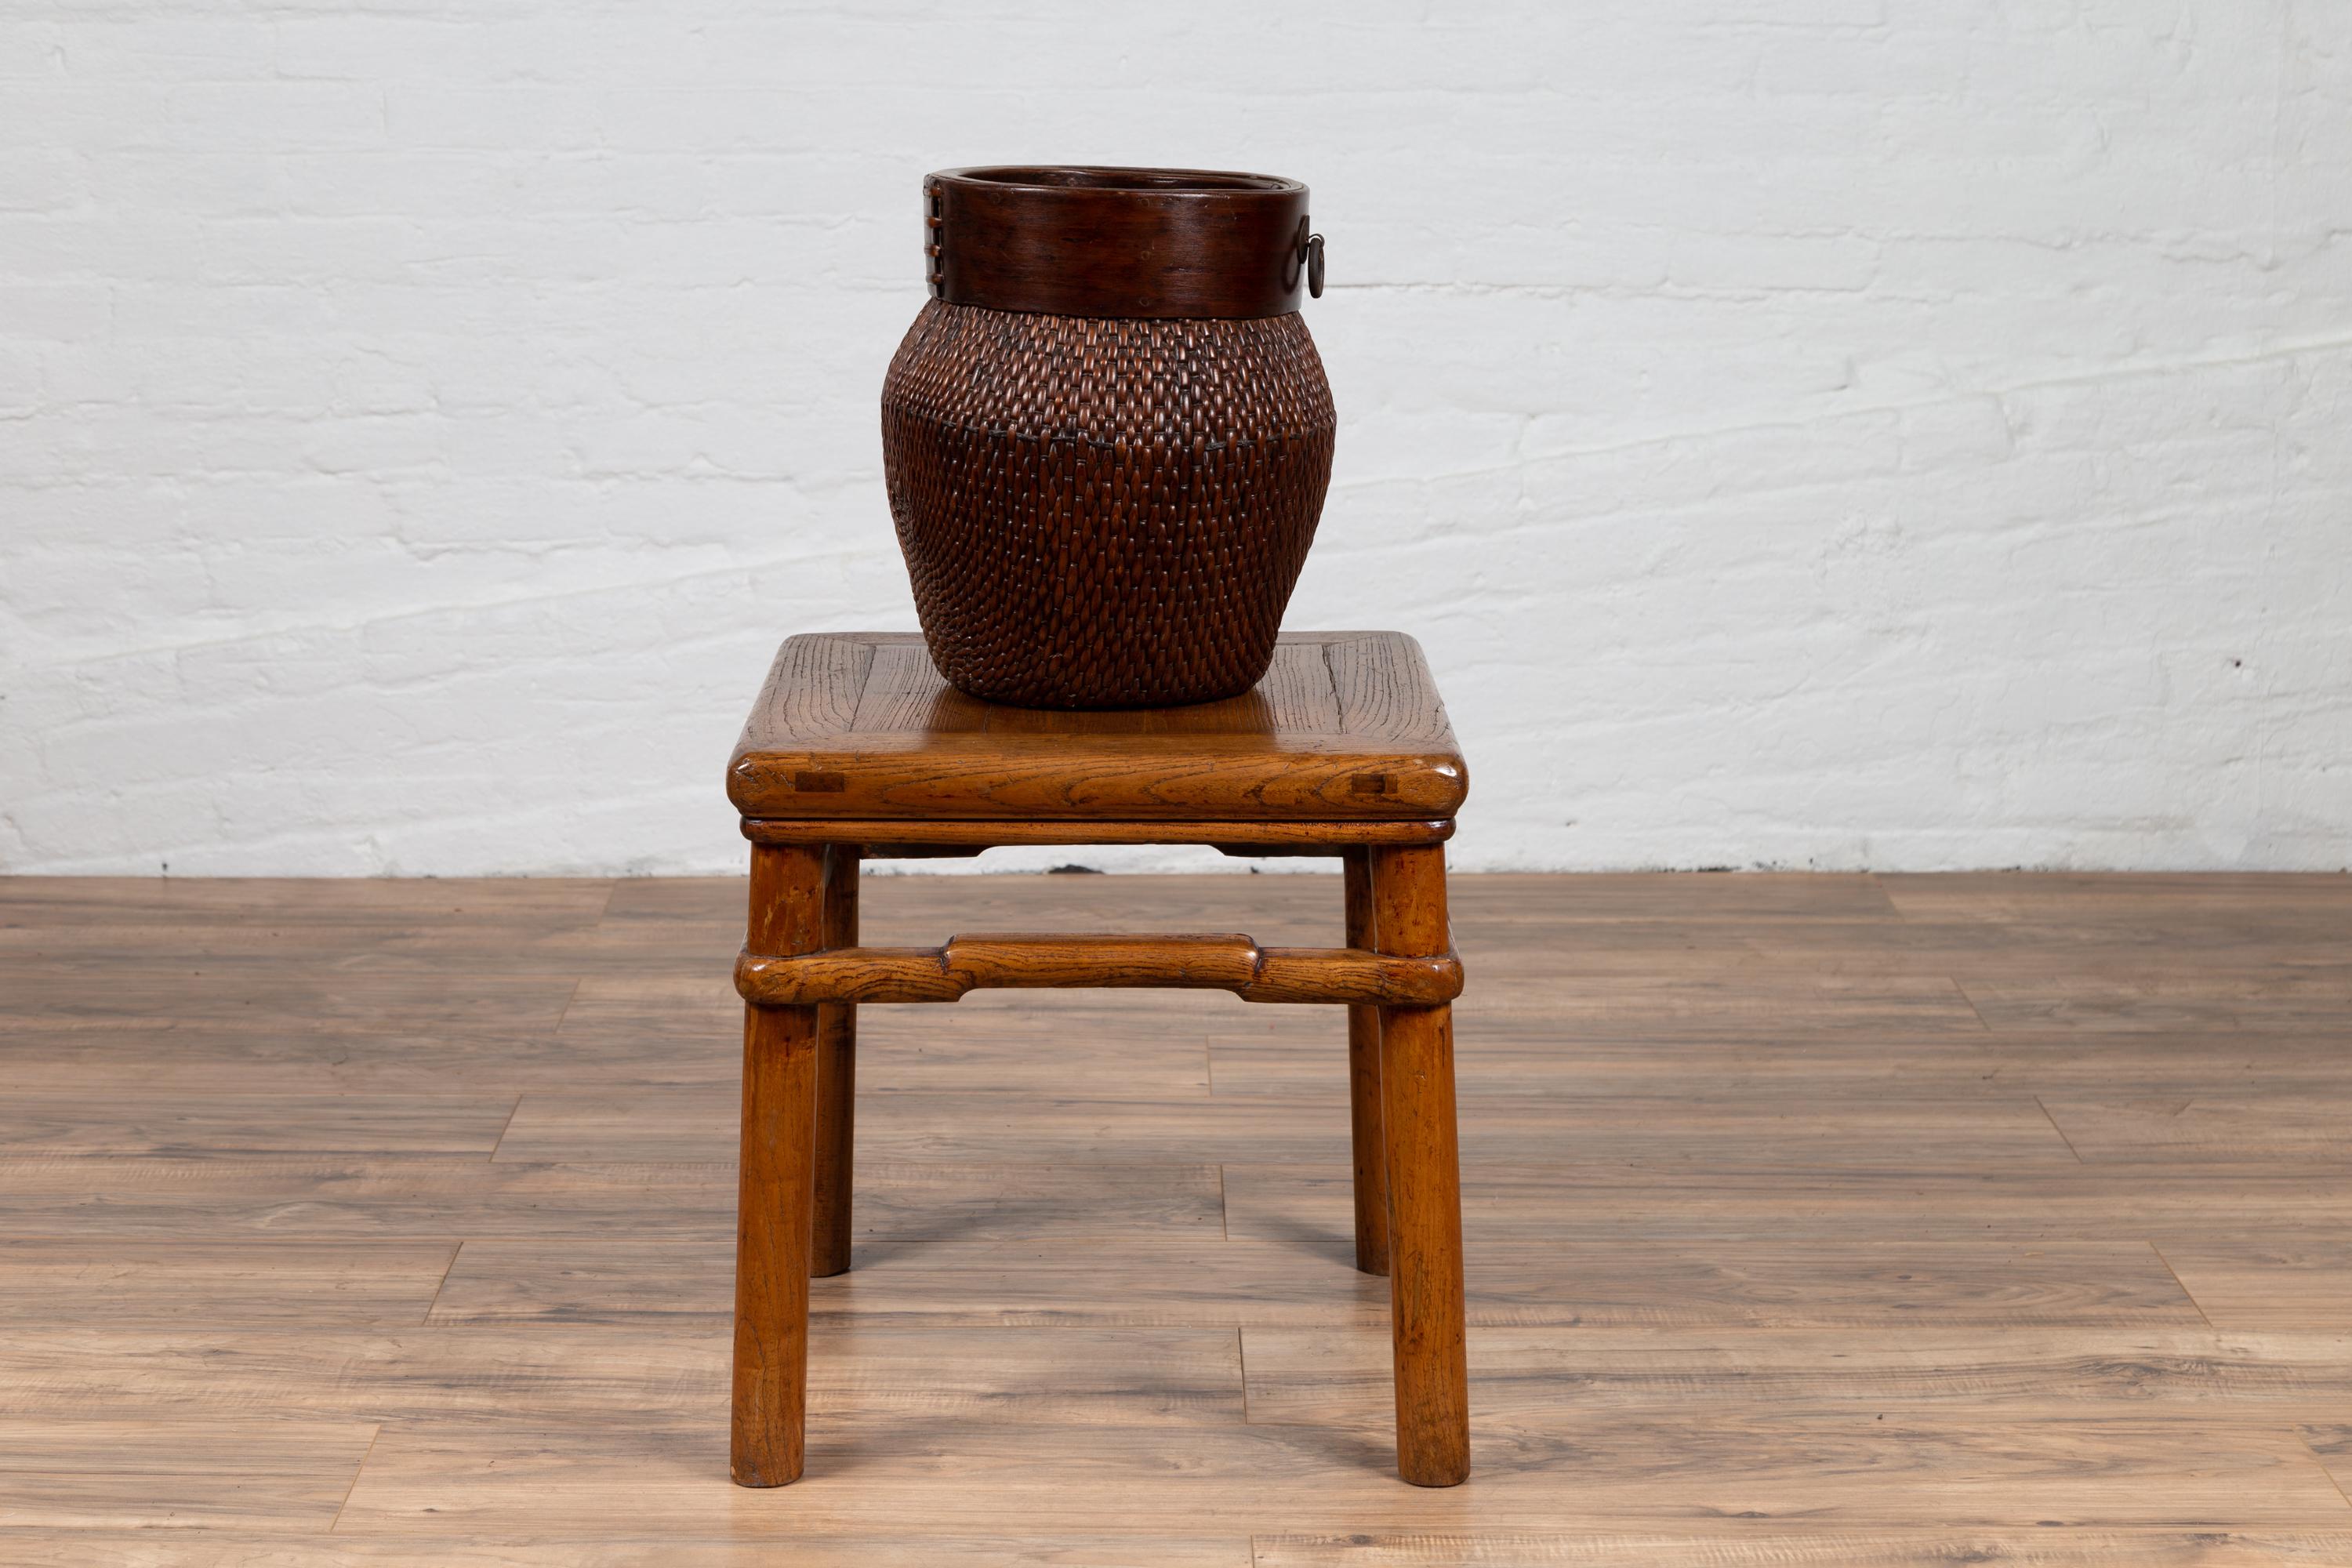 An antique Chinese Ming dynasty style natural wood side table from the early 20th century, with humpbacked stretcher, rich grain design and cylindrical legs. We currently have two tables available, priced and sold individually. Born in China during